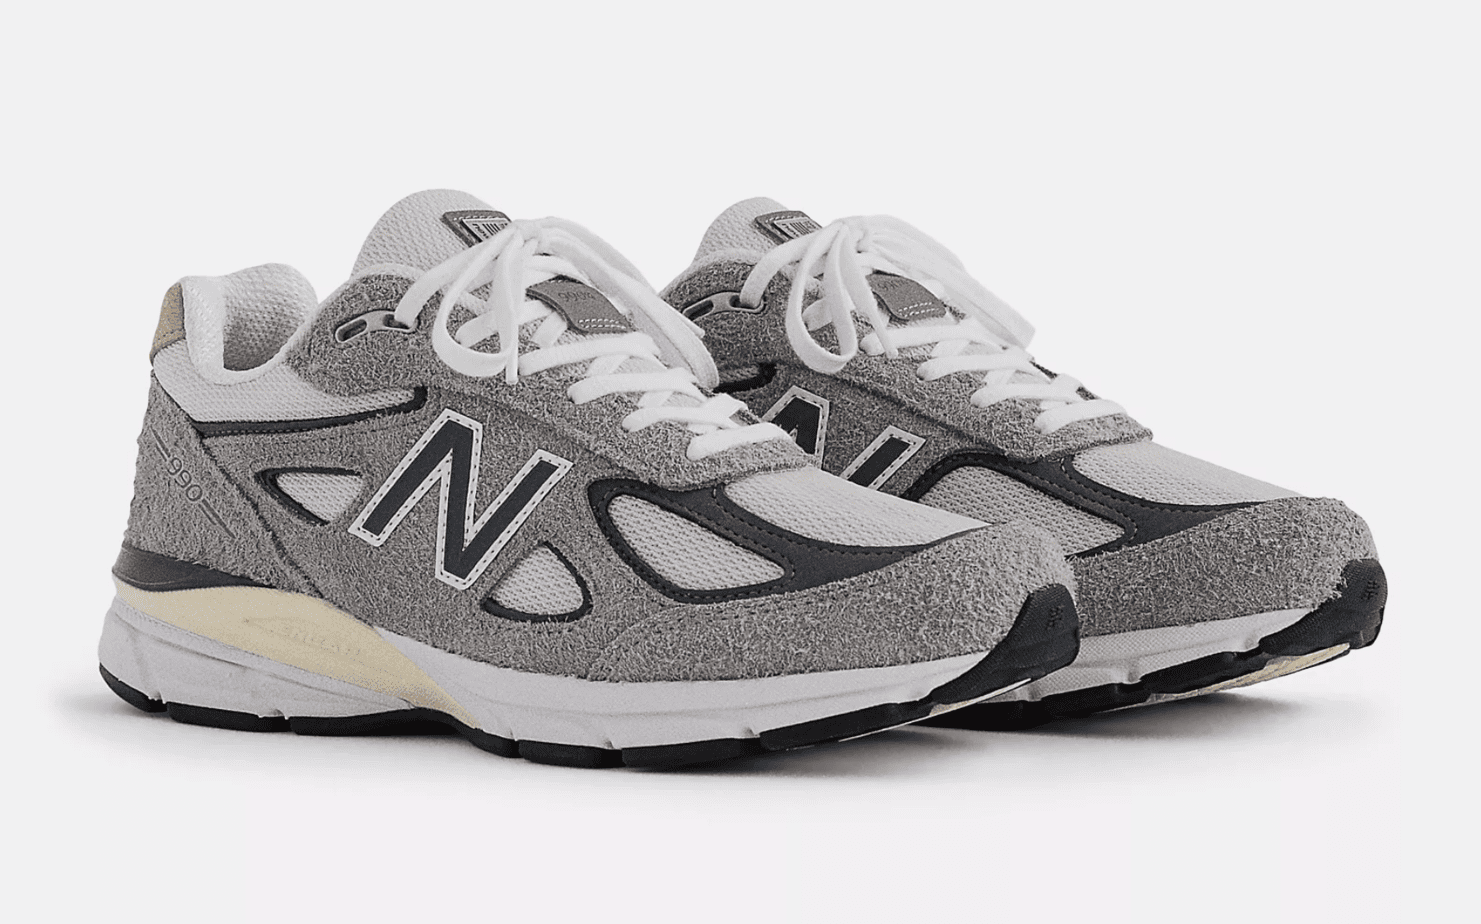 New Balance’s ‘Grey Day’ 990v4 Made in USA is Available Now